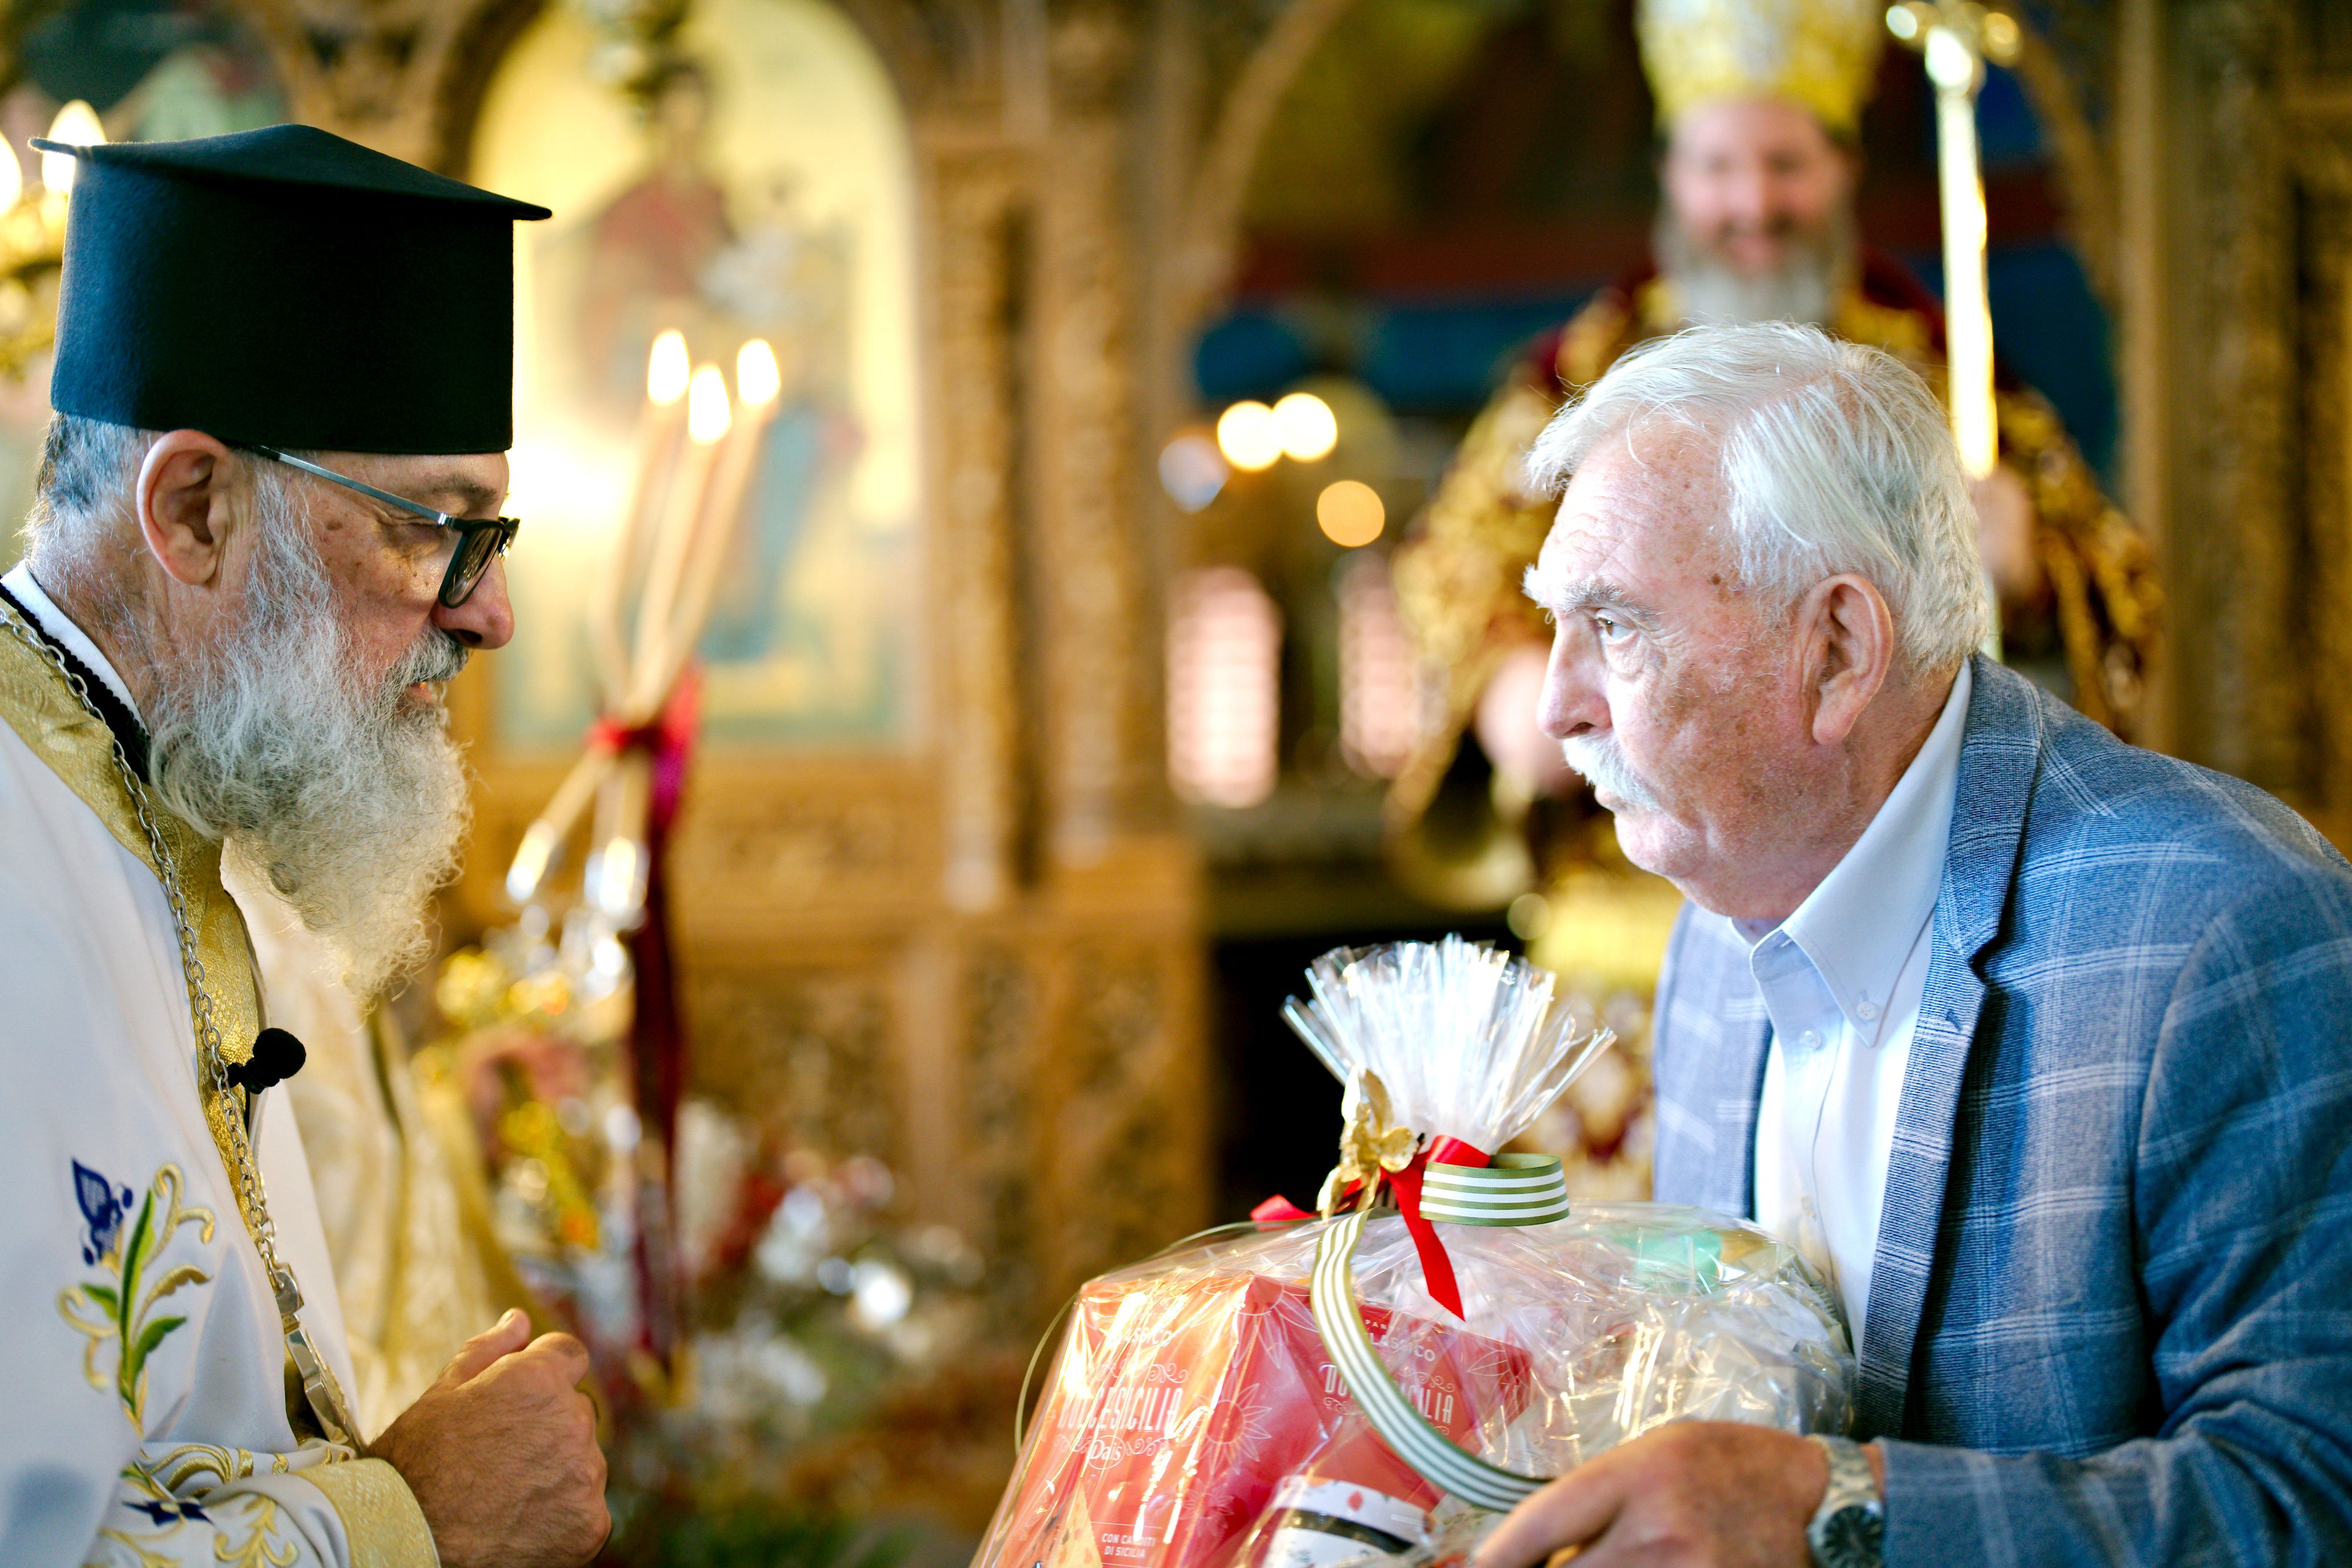 The Feast Day of Christmas celebrated with splendour in Perth, WA